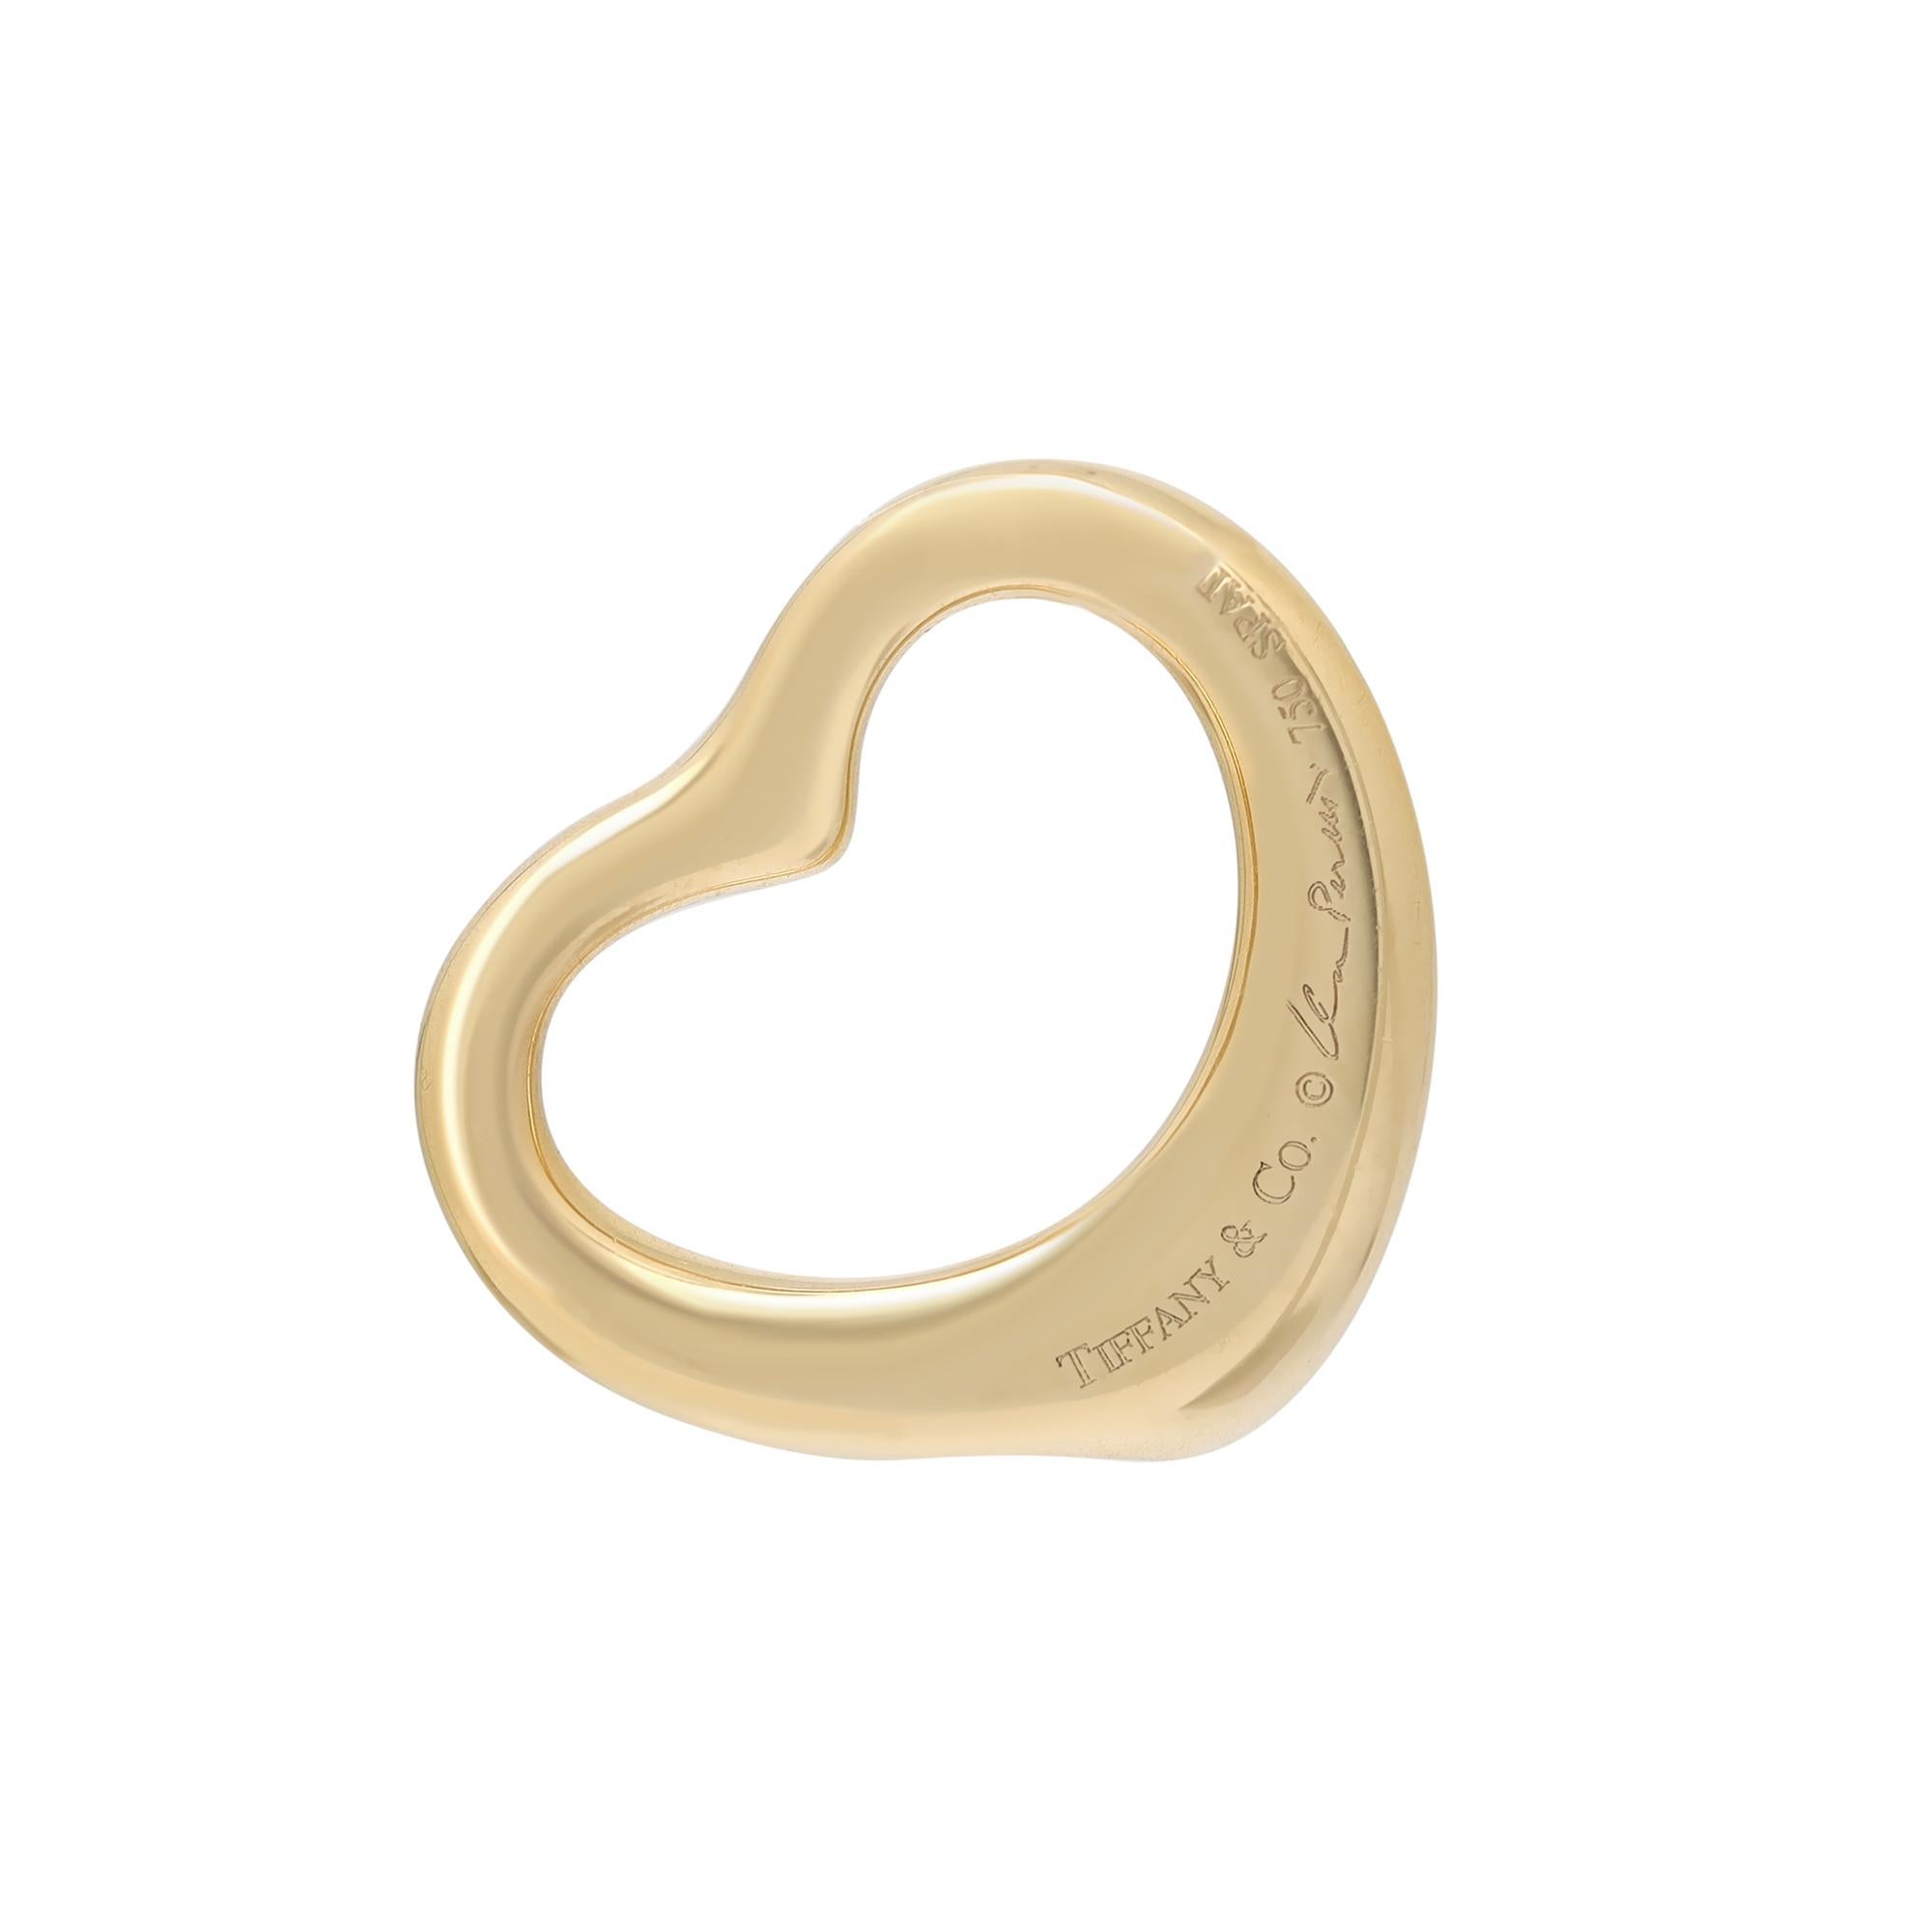 Tiffany & Co. Elsa Peretti open heart diamond pendant. This design celebrates the spirit of love. Shimmering diamonds accentuate the elegant curves of this pendant. Crafted in 18k yellow gold with pave set round brilliant cut diamonds weighing